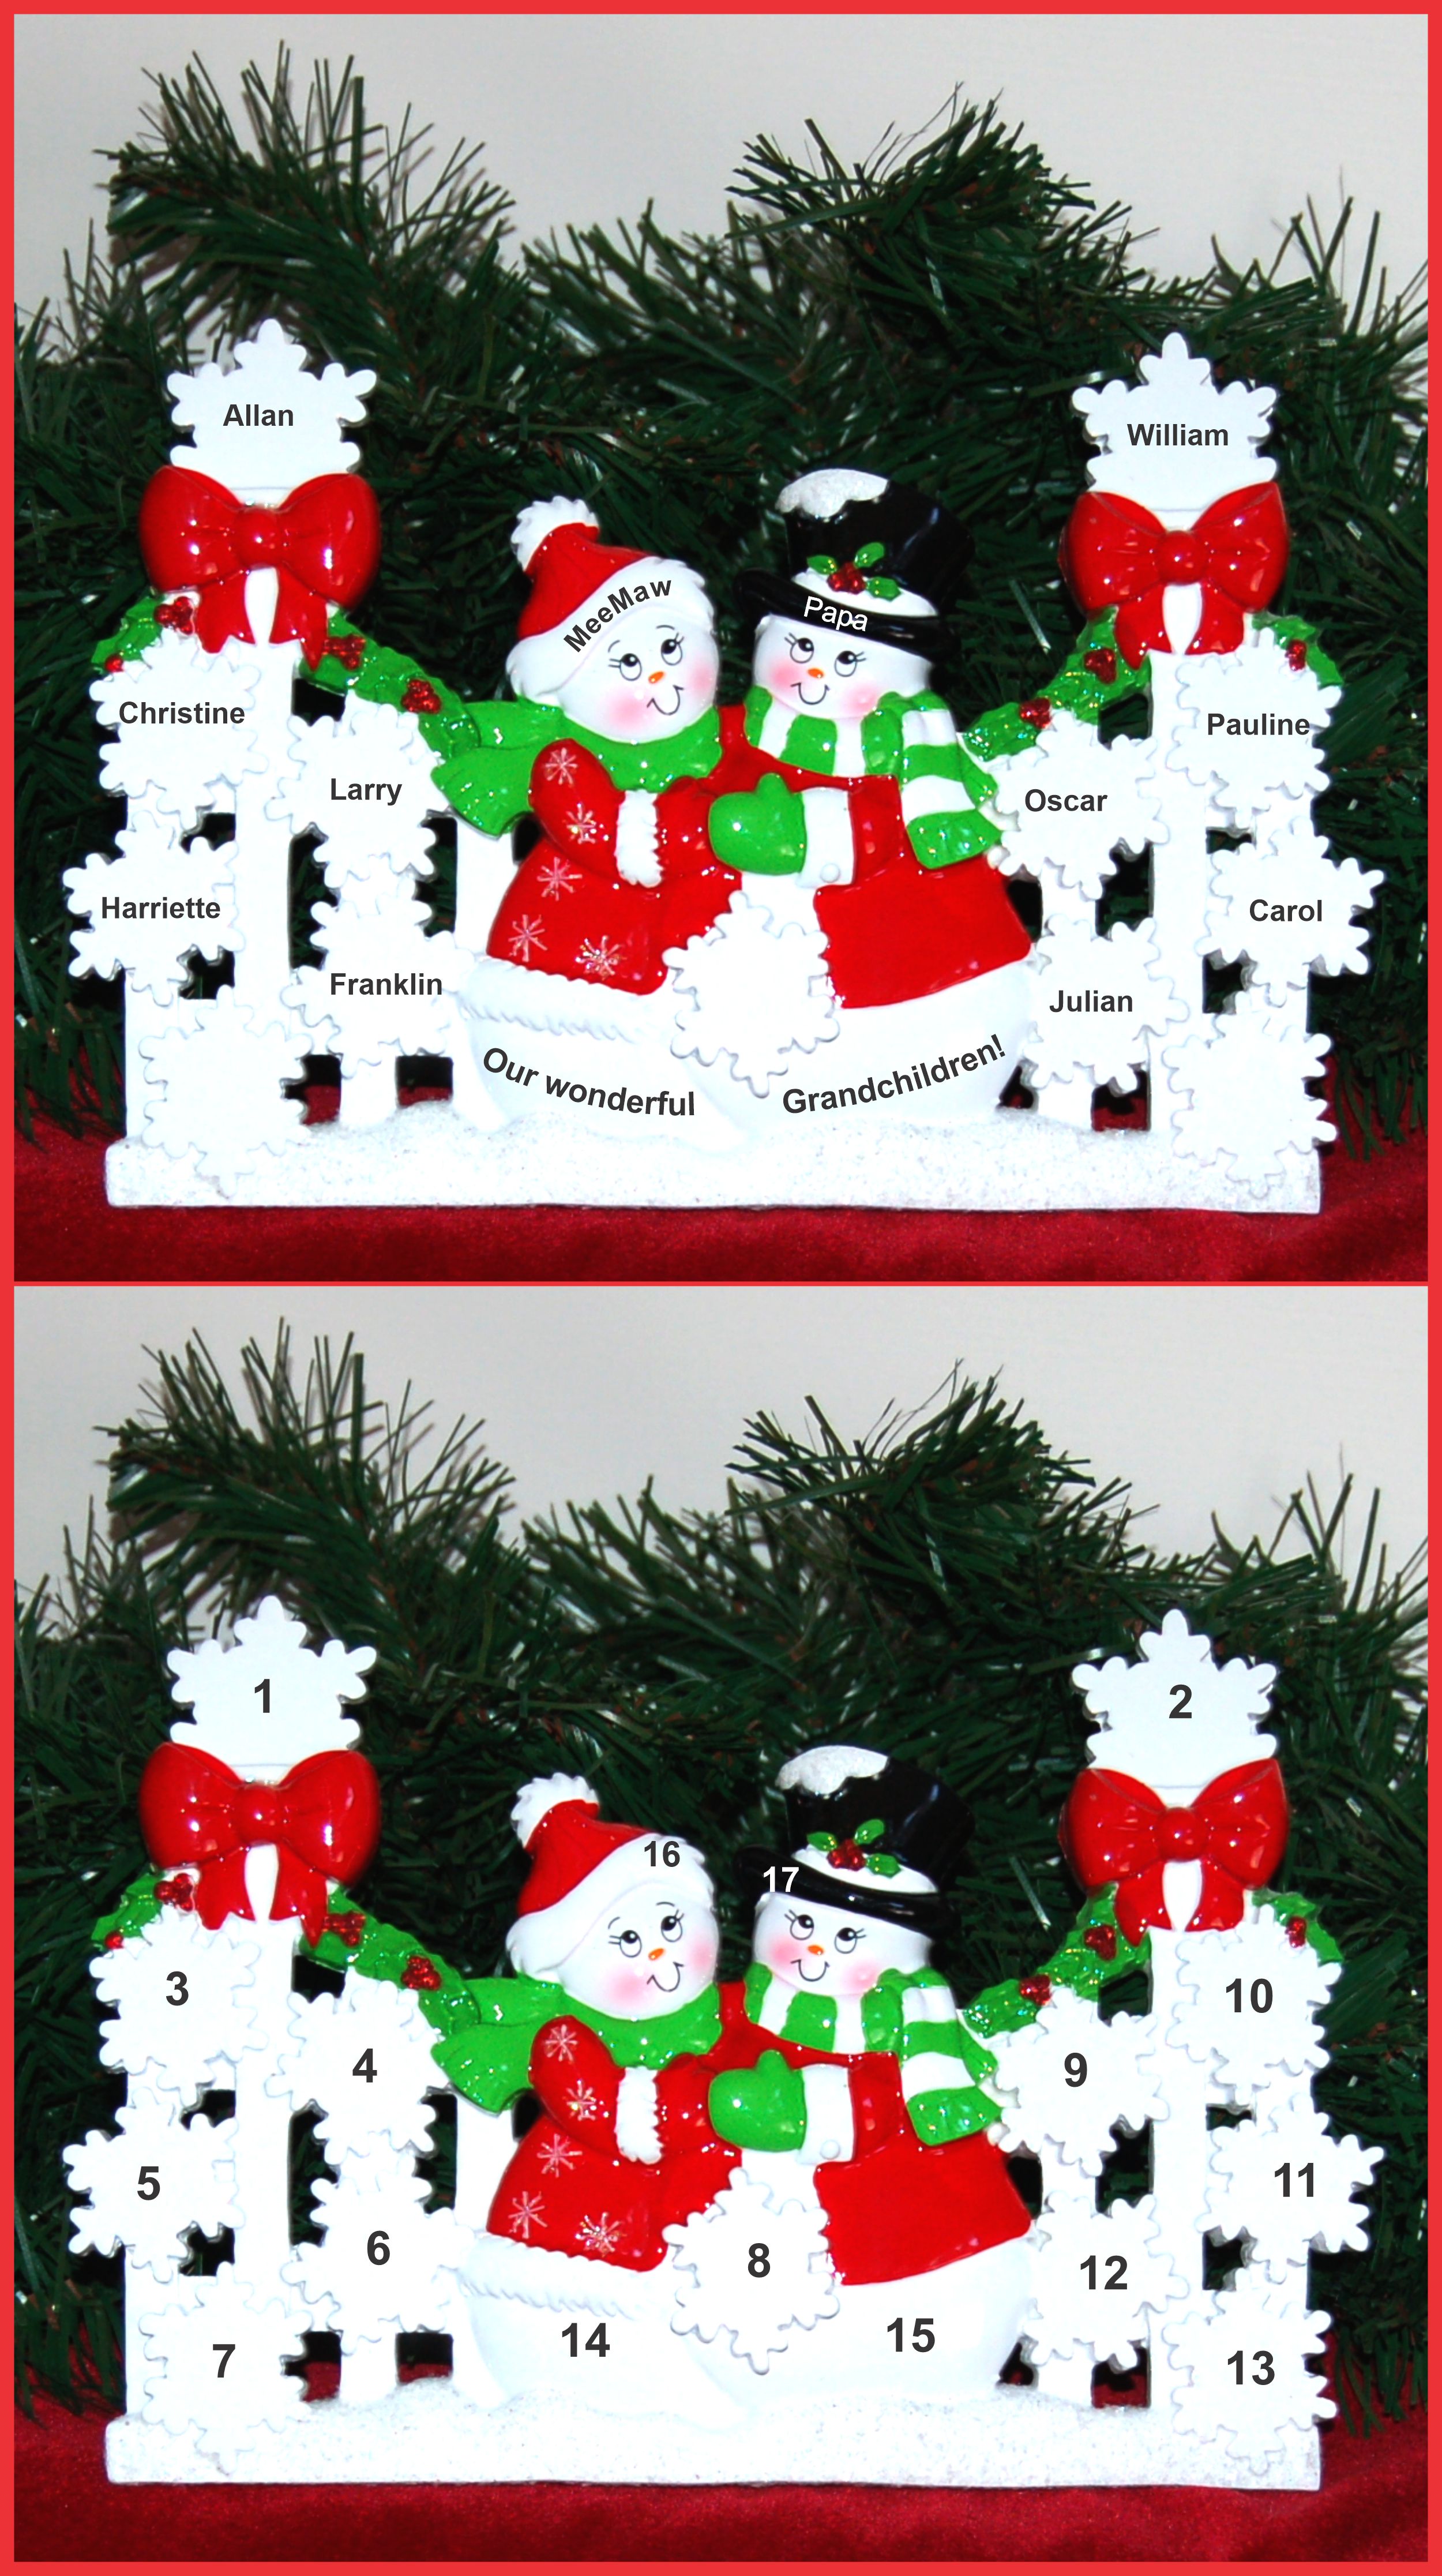 Grandparents Tabletop Christmas Decoration Snowflakes for 9 Grandchildren Personalized by RussellRhodes.com